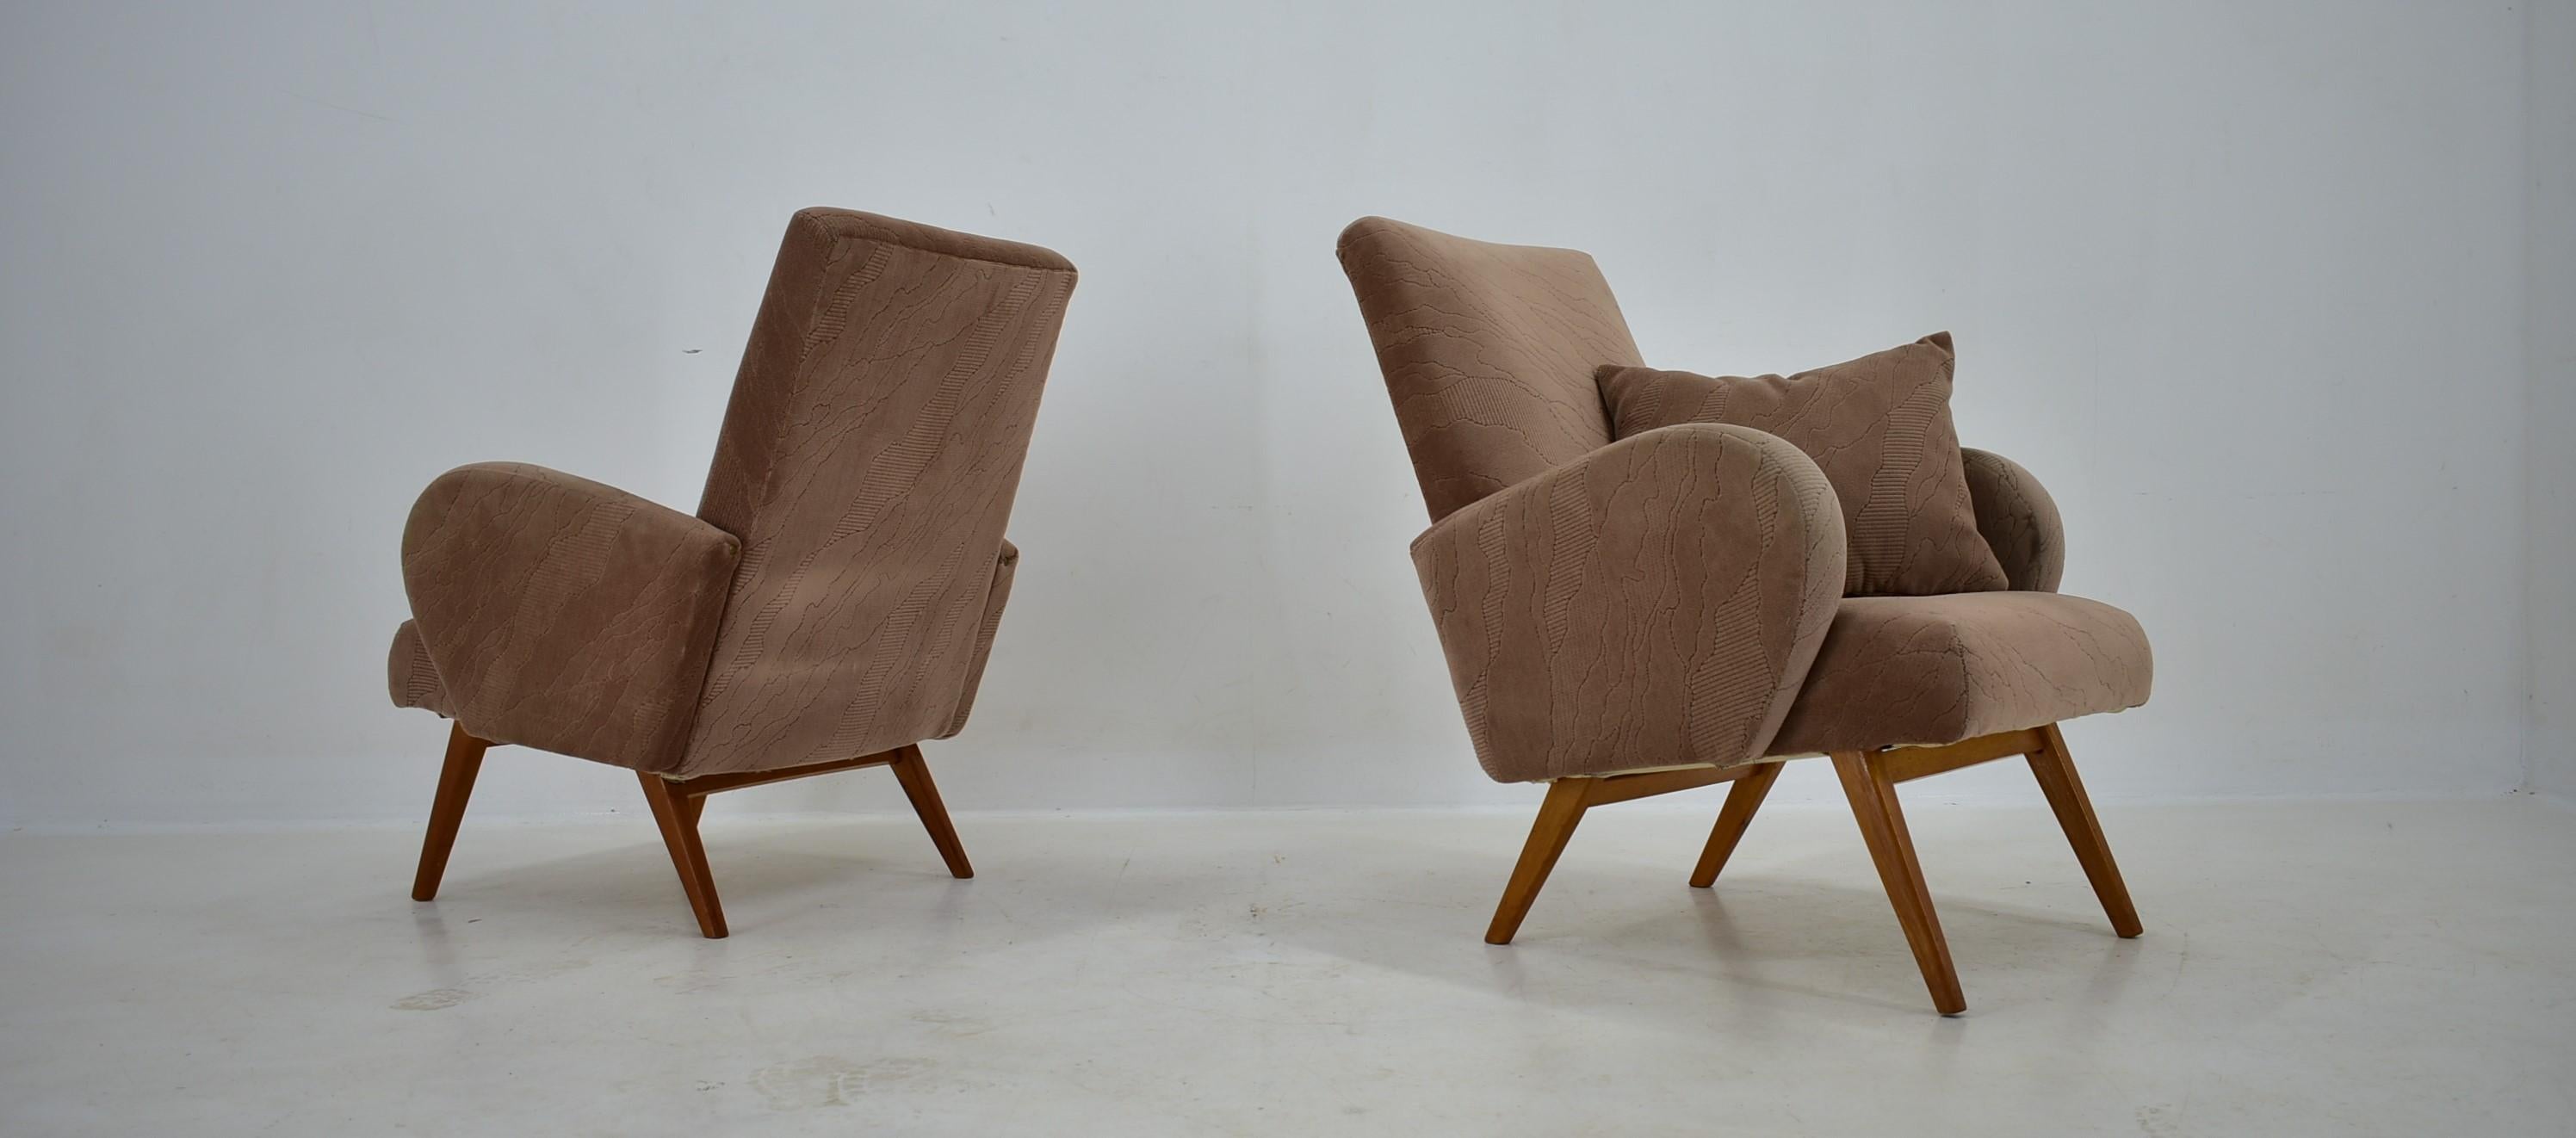 Mid-Century Armchairs for UP Závody, 1950's For Sale 7